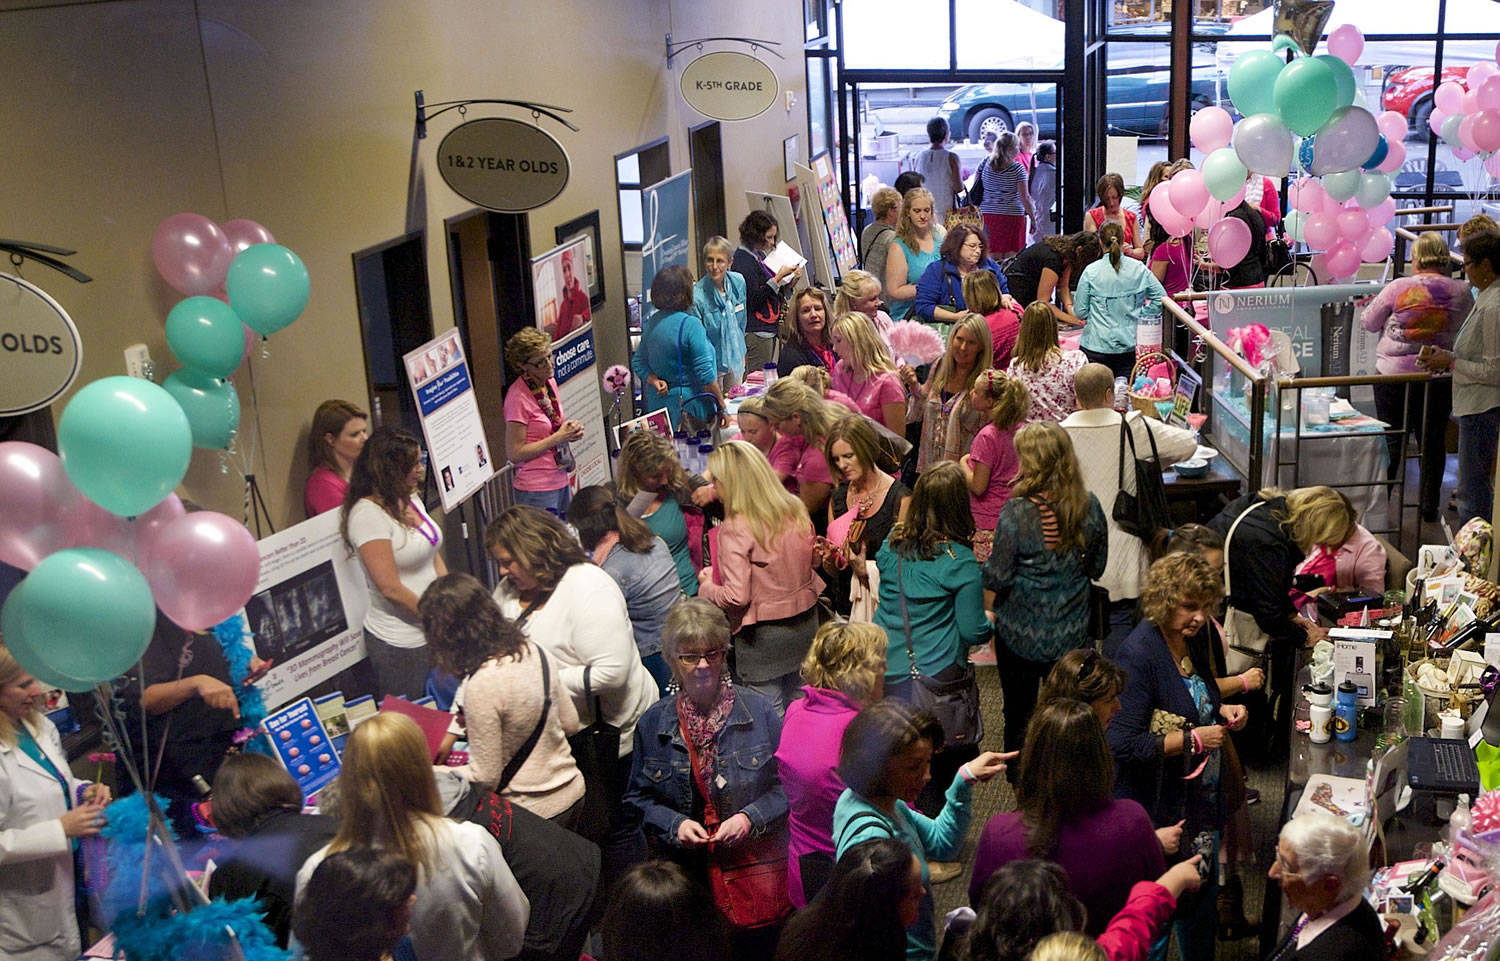 Journey Community Church serves as an information hub during the Downtown Camas Association's Girls' Night Out on Sept. 25.